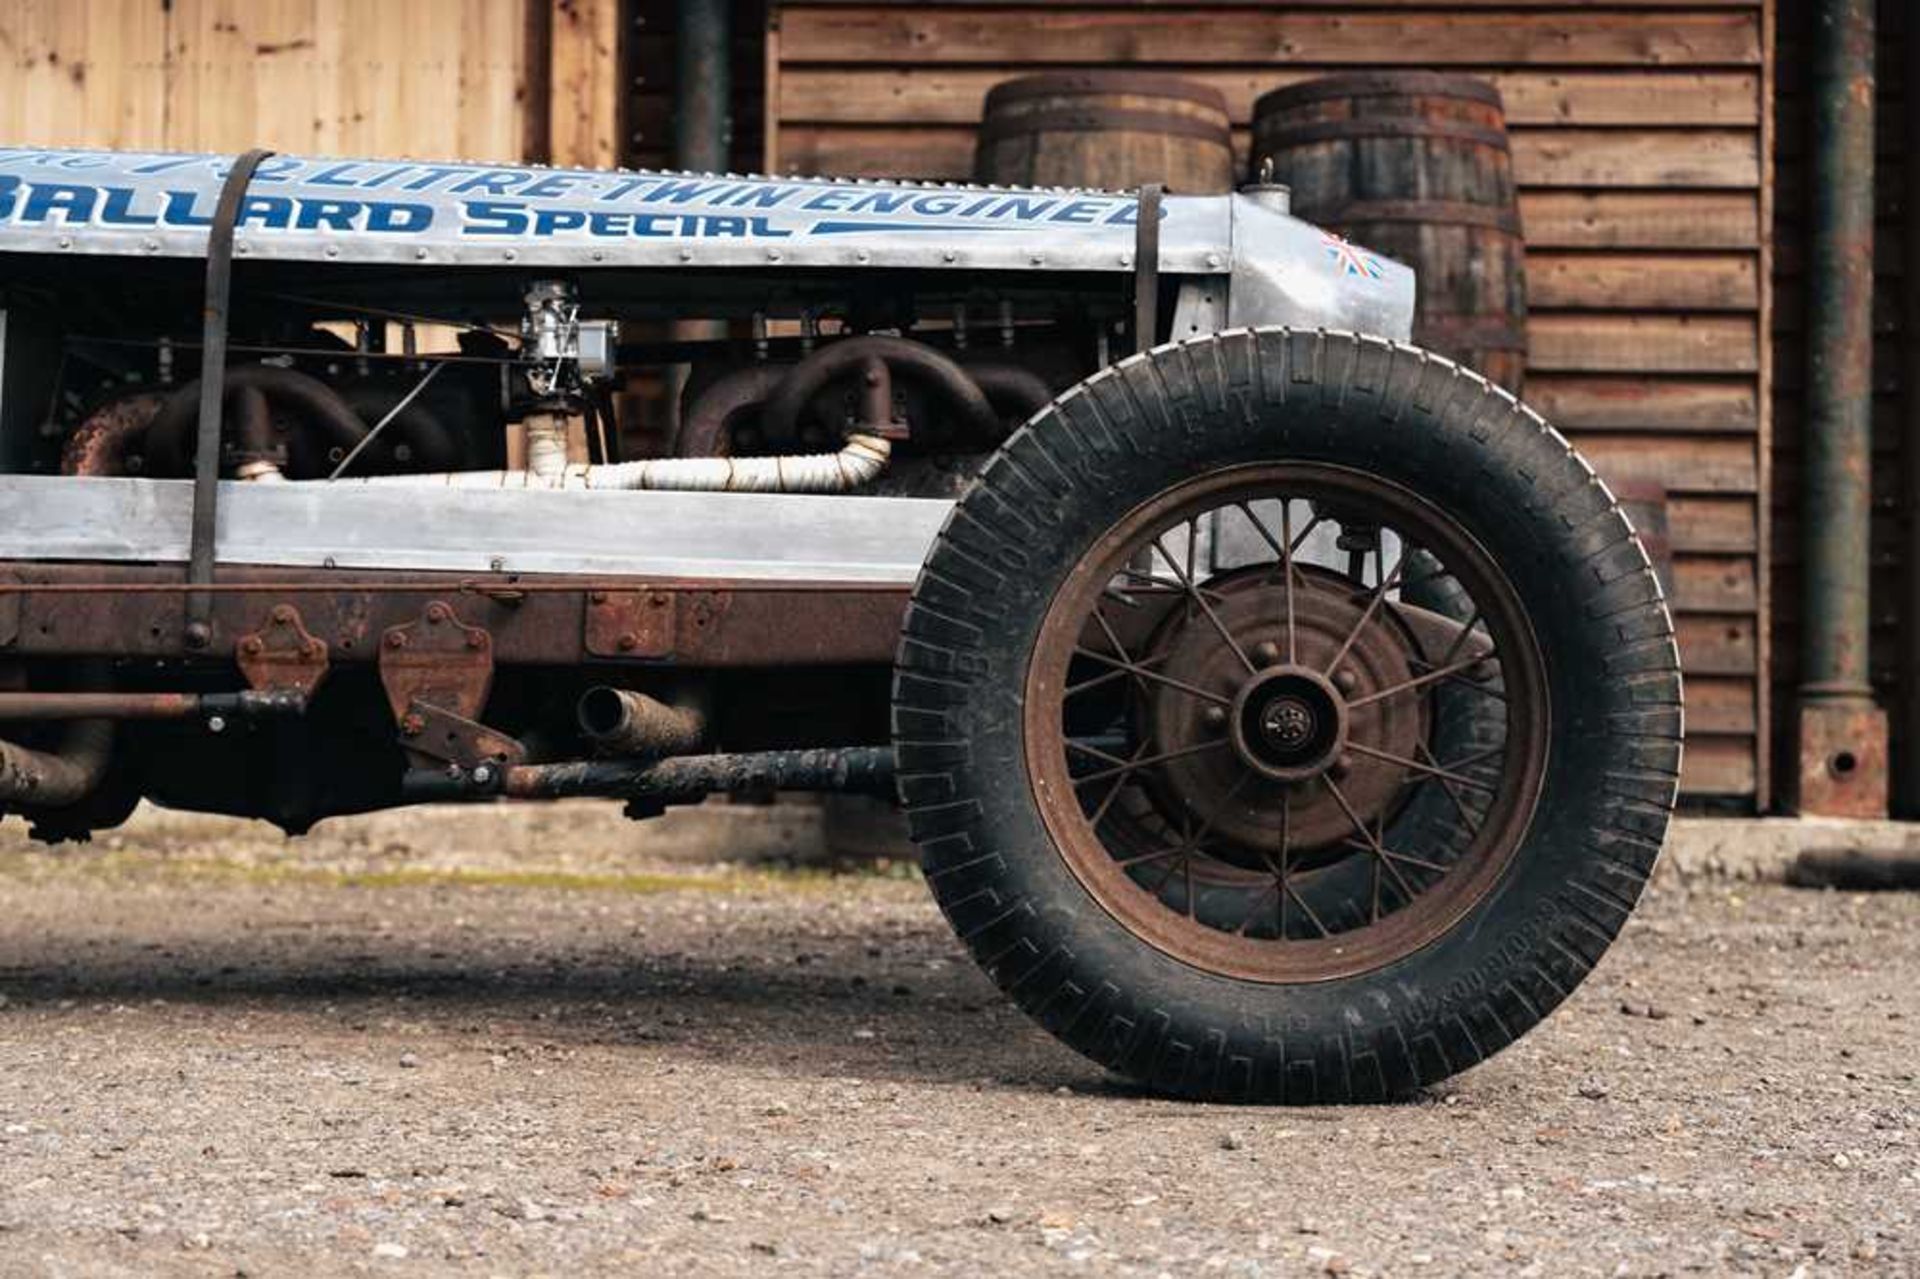 1930 Ford Model A "The Ballard Special" Speedster One off, bespoke built twin-engined pre-war racing - Image 33 of 94